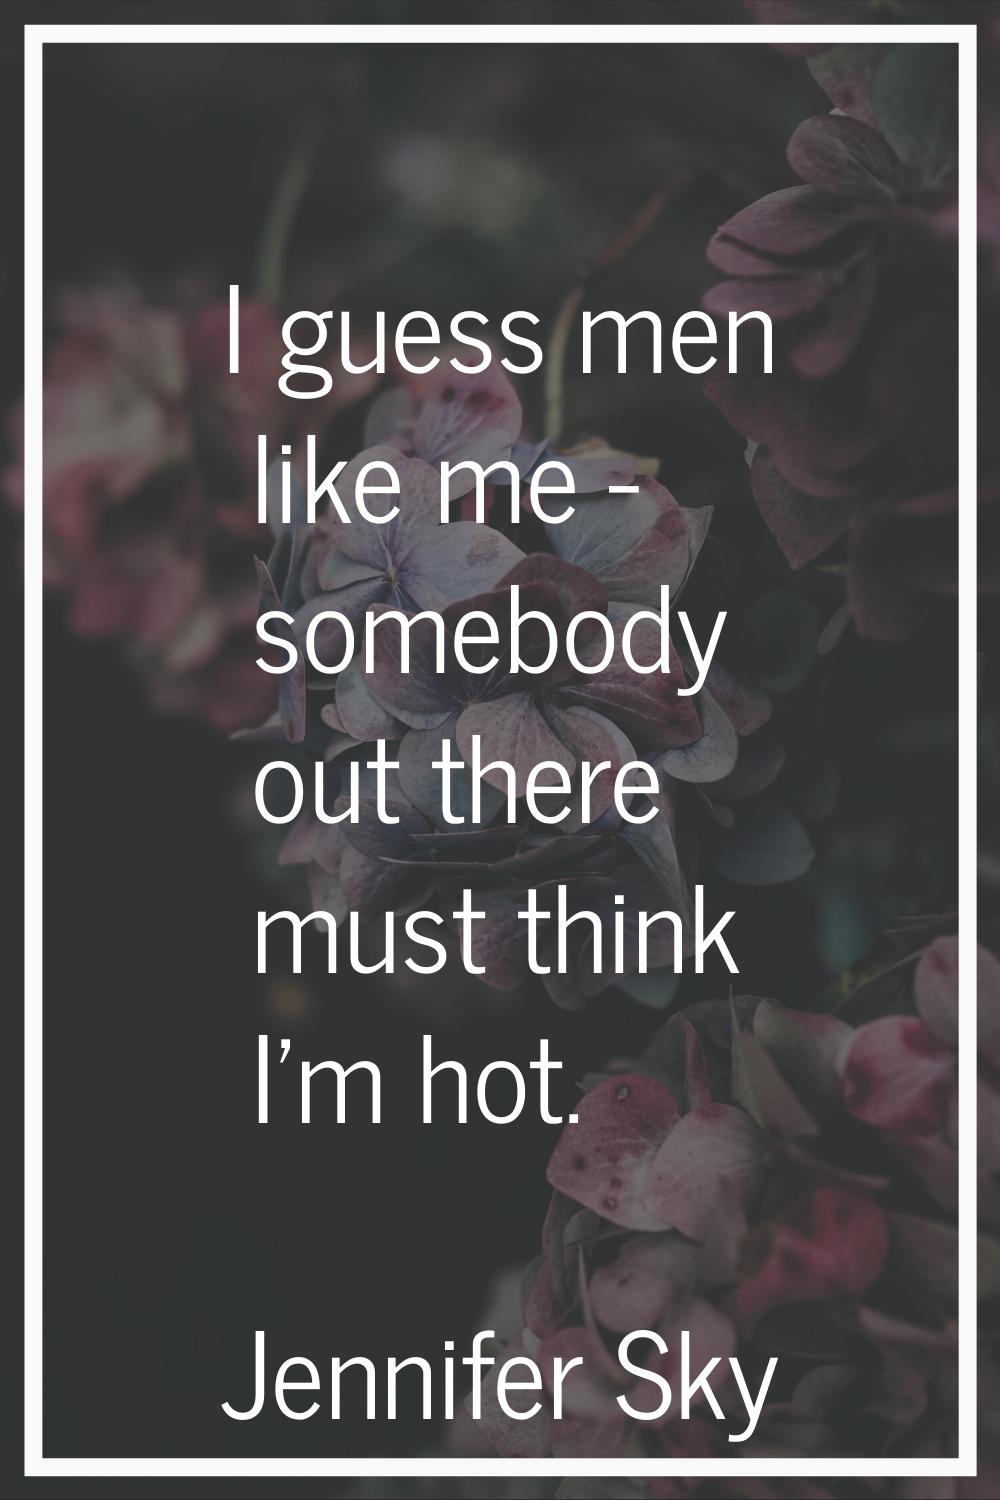 I guess men like me - somebody out there must think I'm hot.